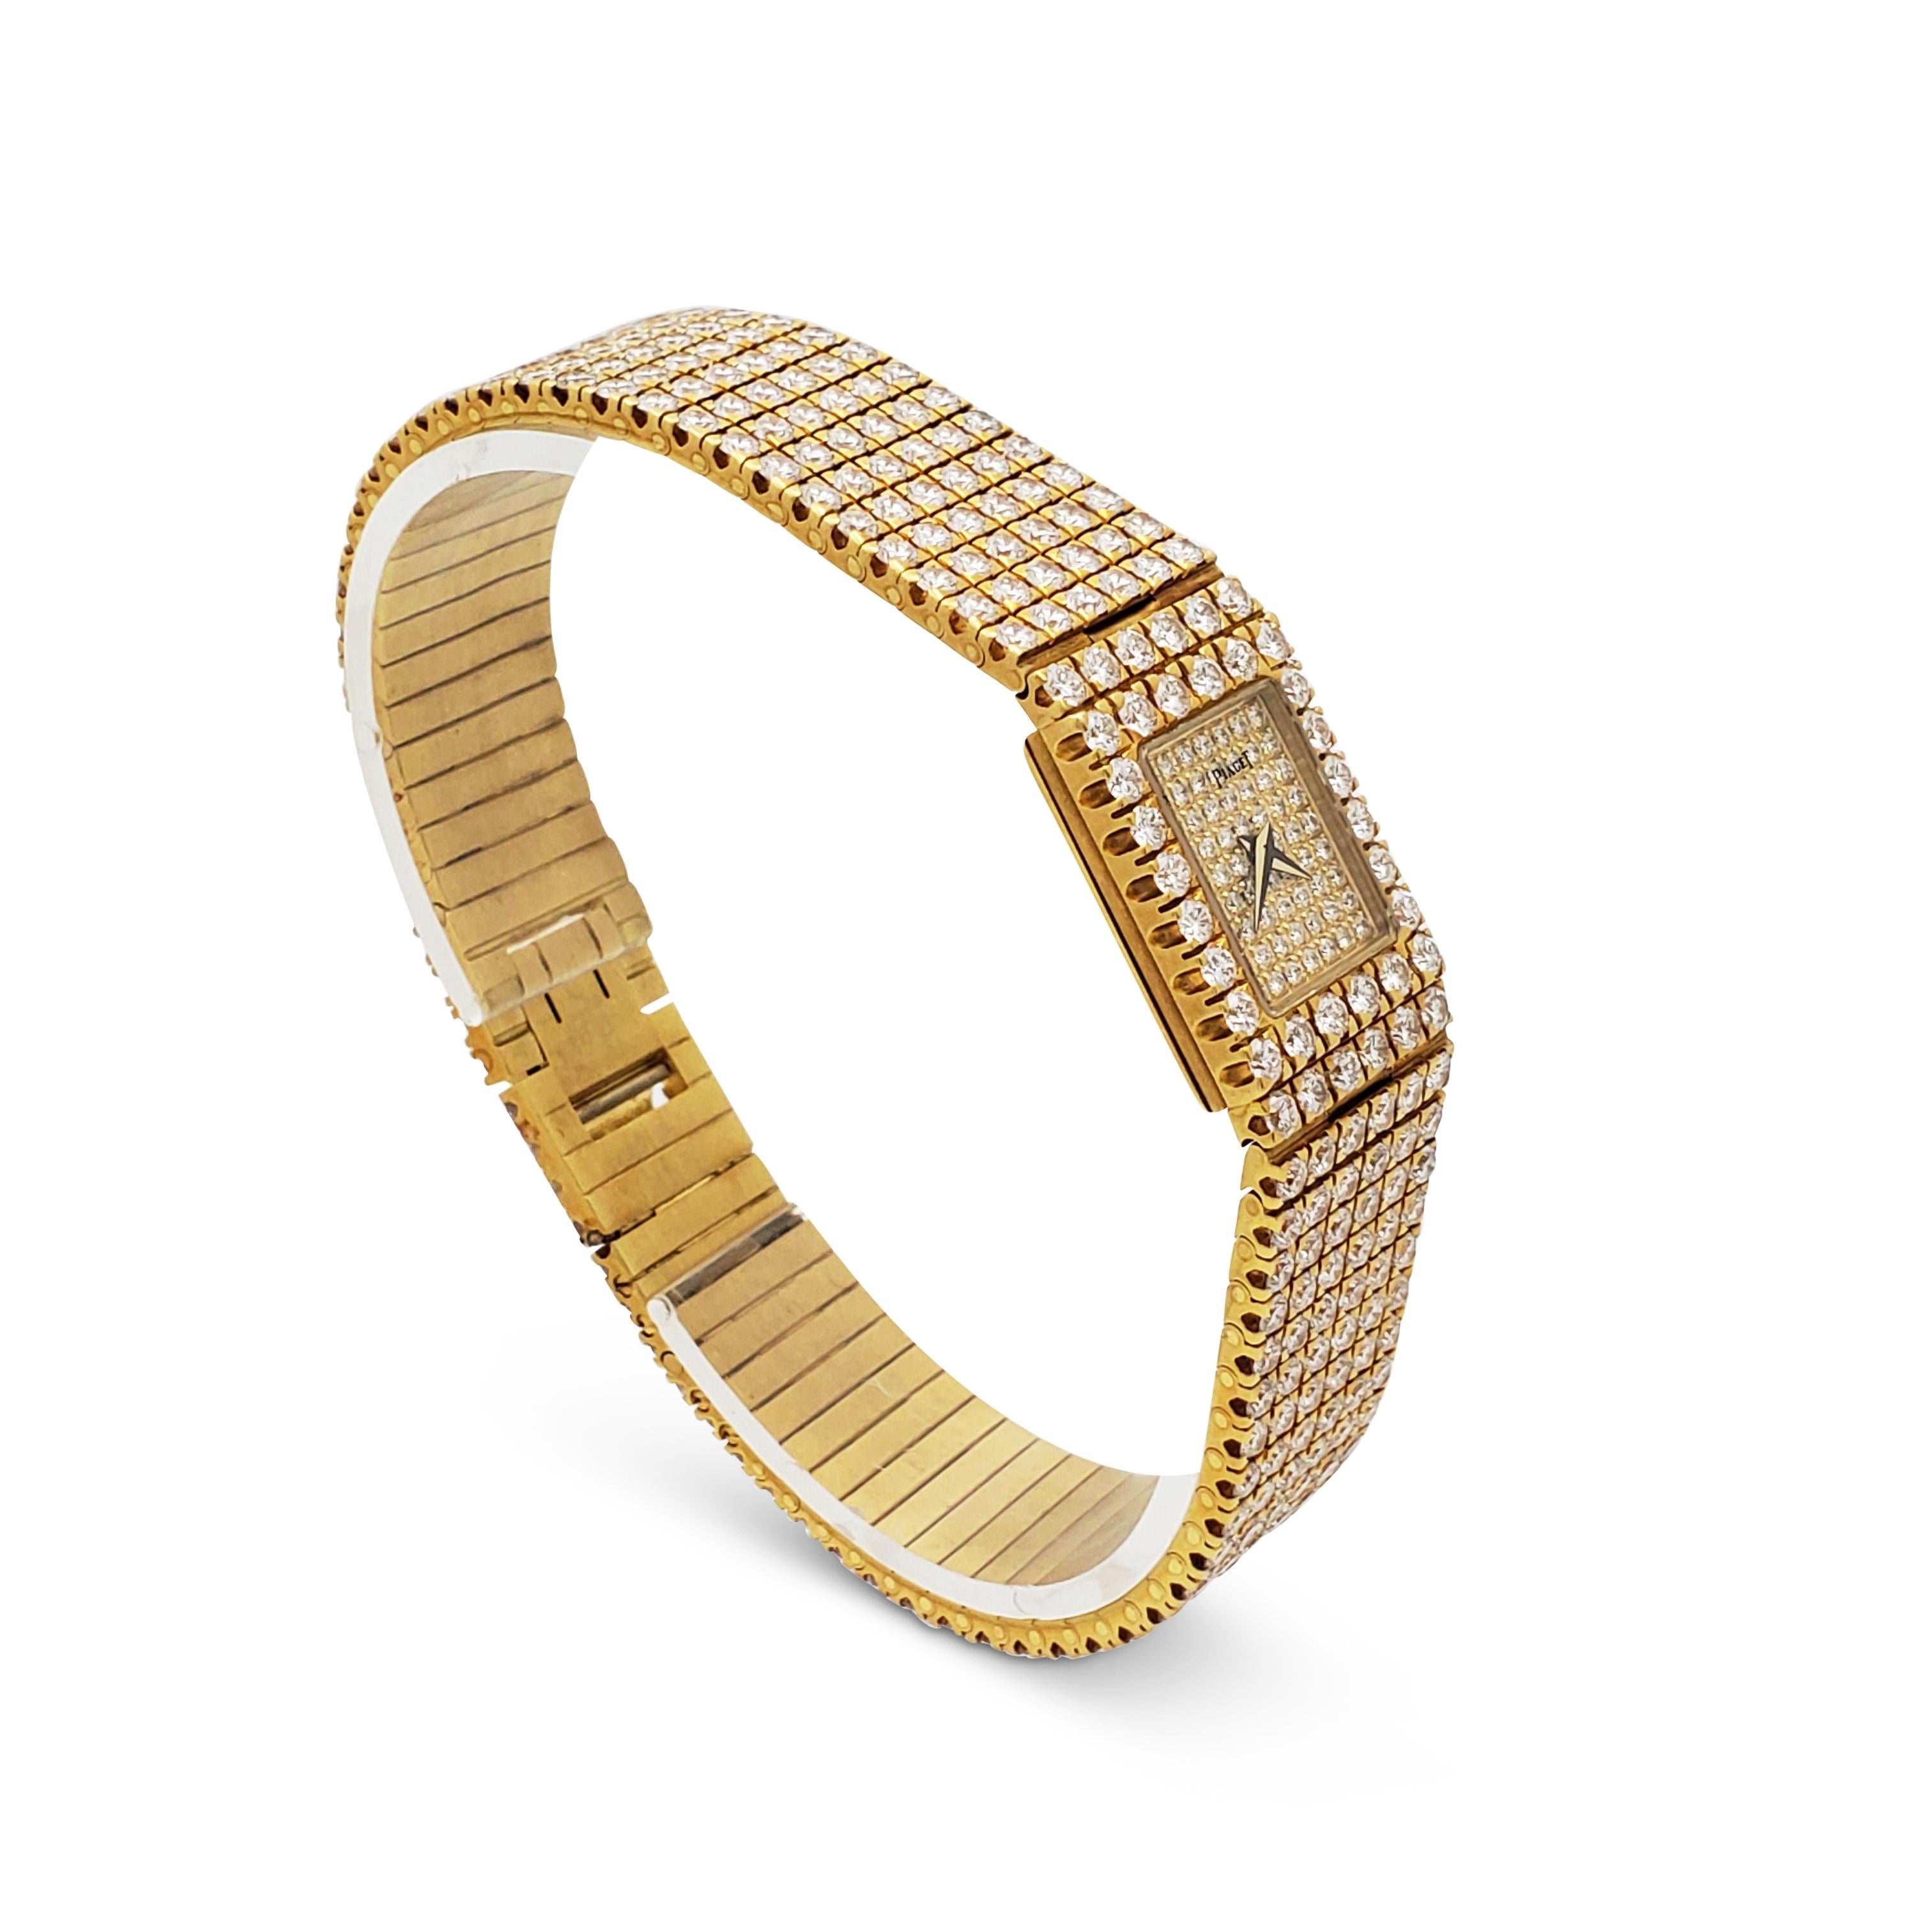 Authentic Piaget polo ladies watch crafted in 18 karat yellow gold and set with approximately 17 carats of dazzling round brilliant cut diamonds.  Quartz movement, 19.5mm case, yellow gold diamond-set dial and bracelet.  Will fit up to a 7-inch